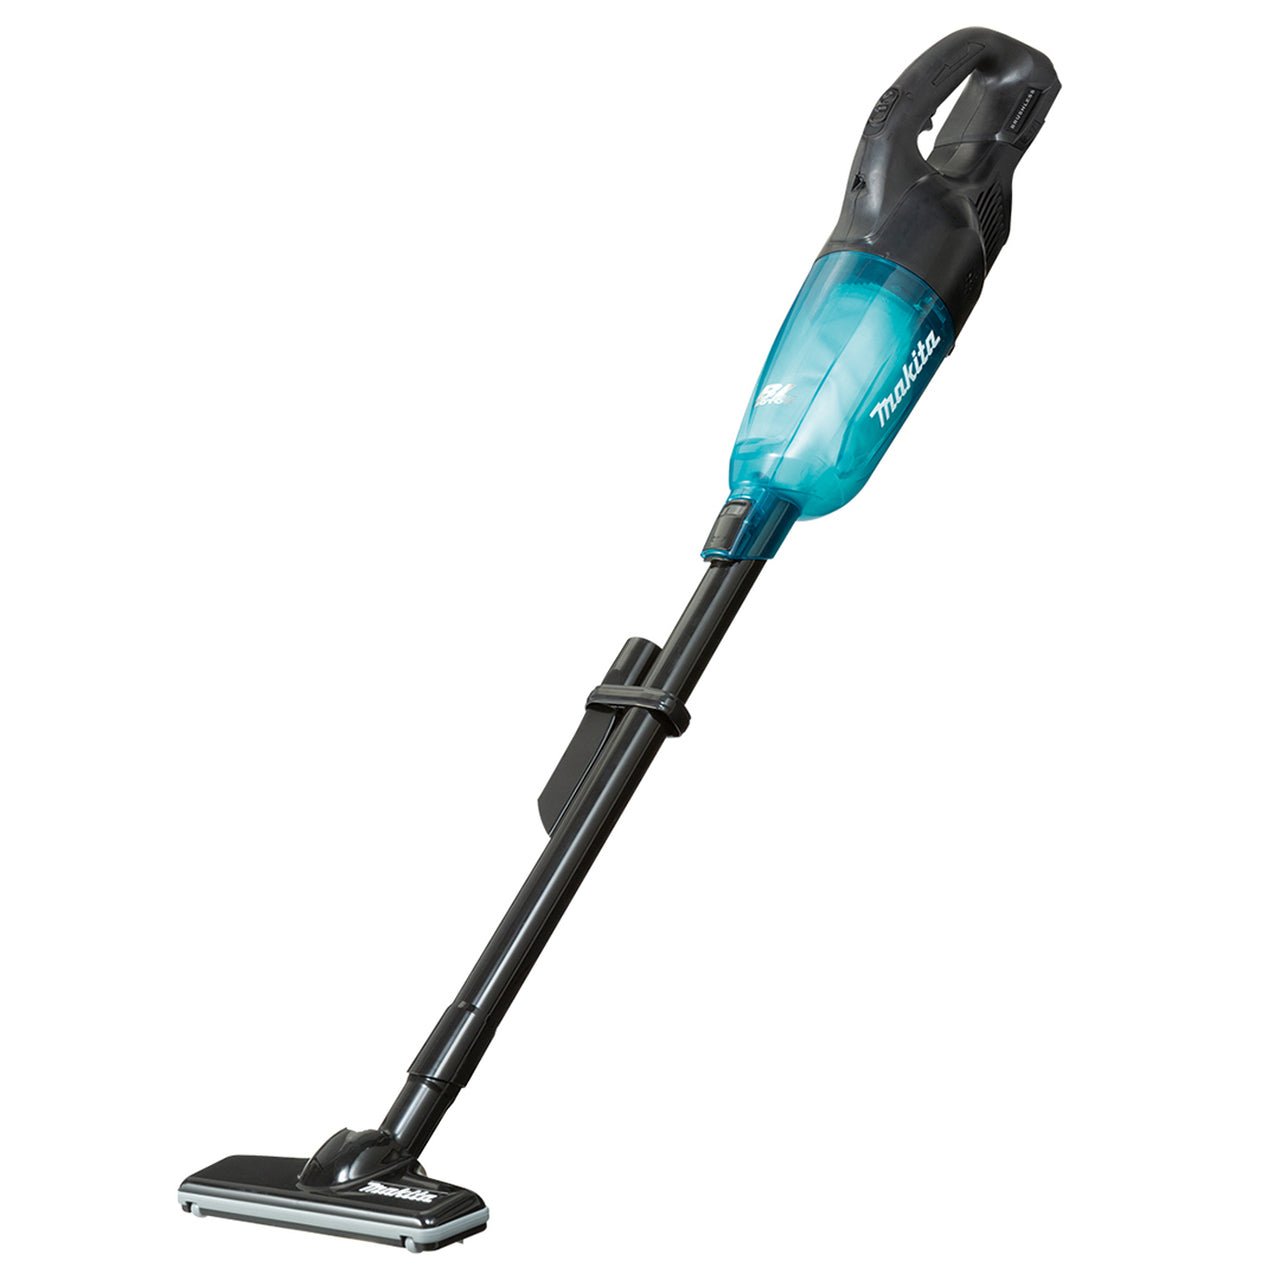 Makita DCL280FZB  -  18V LXT Brushless Vacuum Cleaner, Black/Teal (Tool Only)